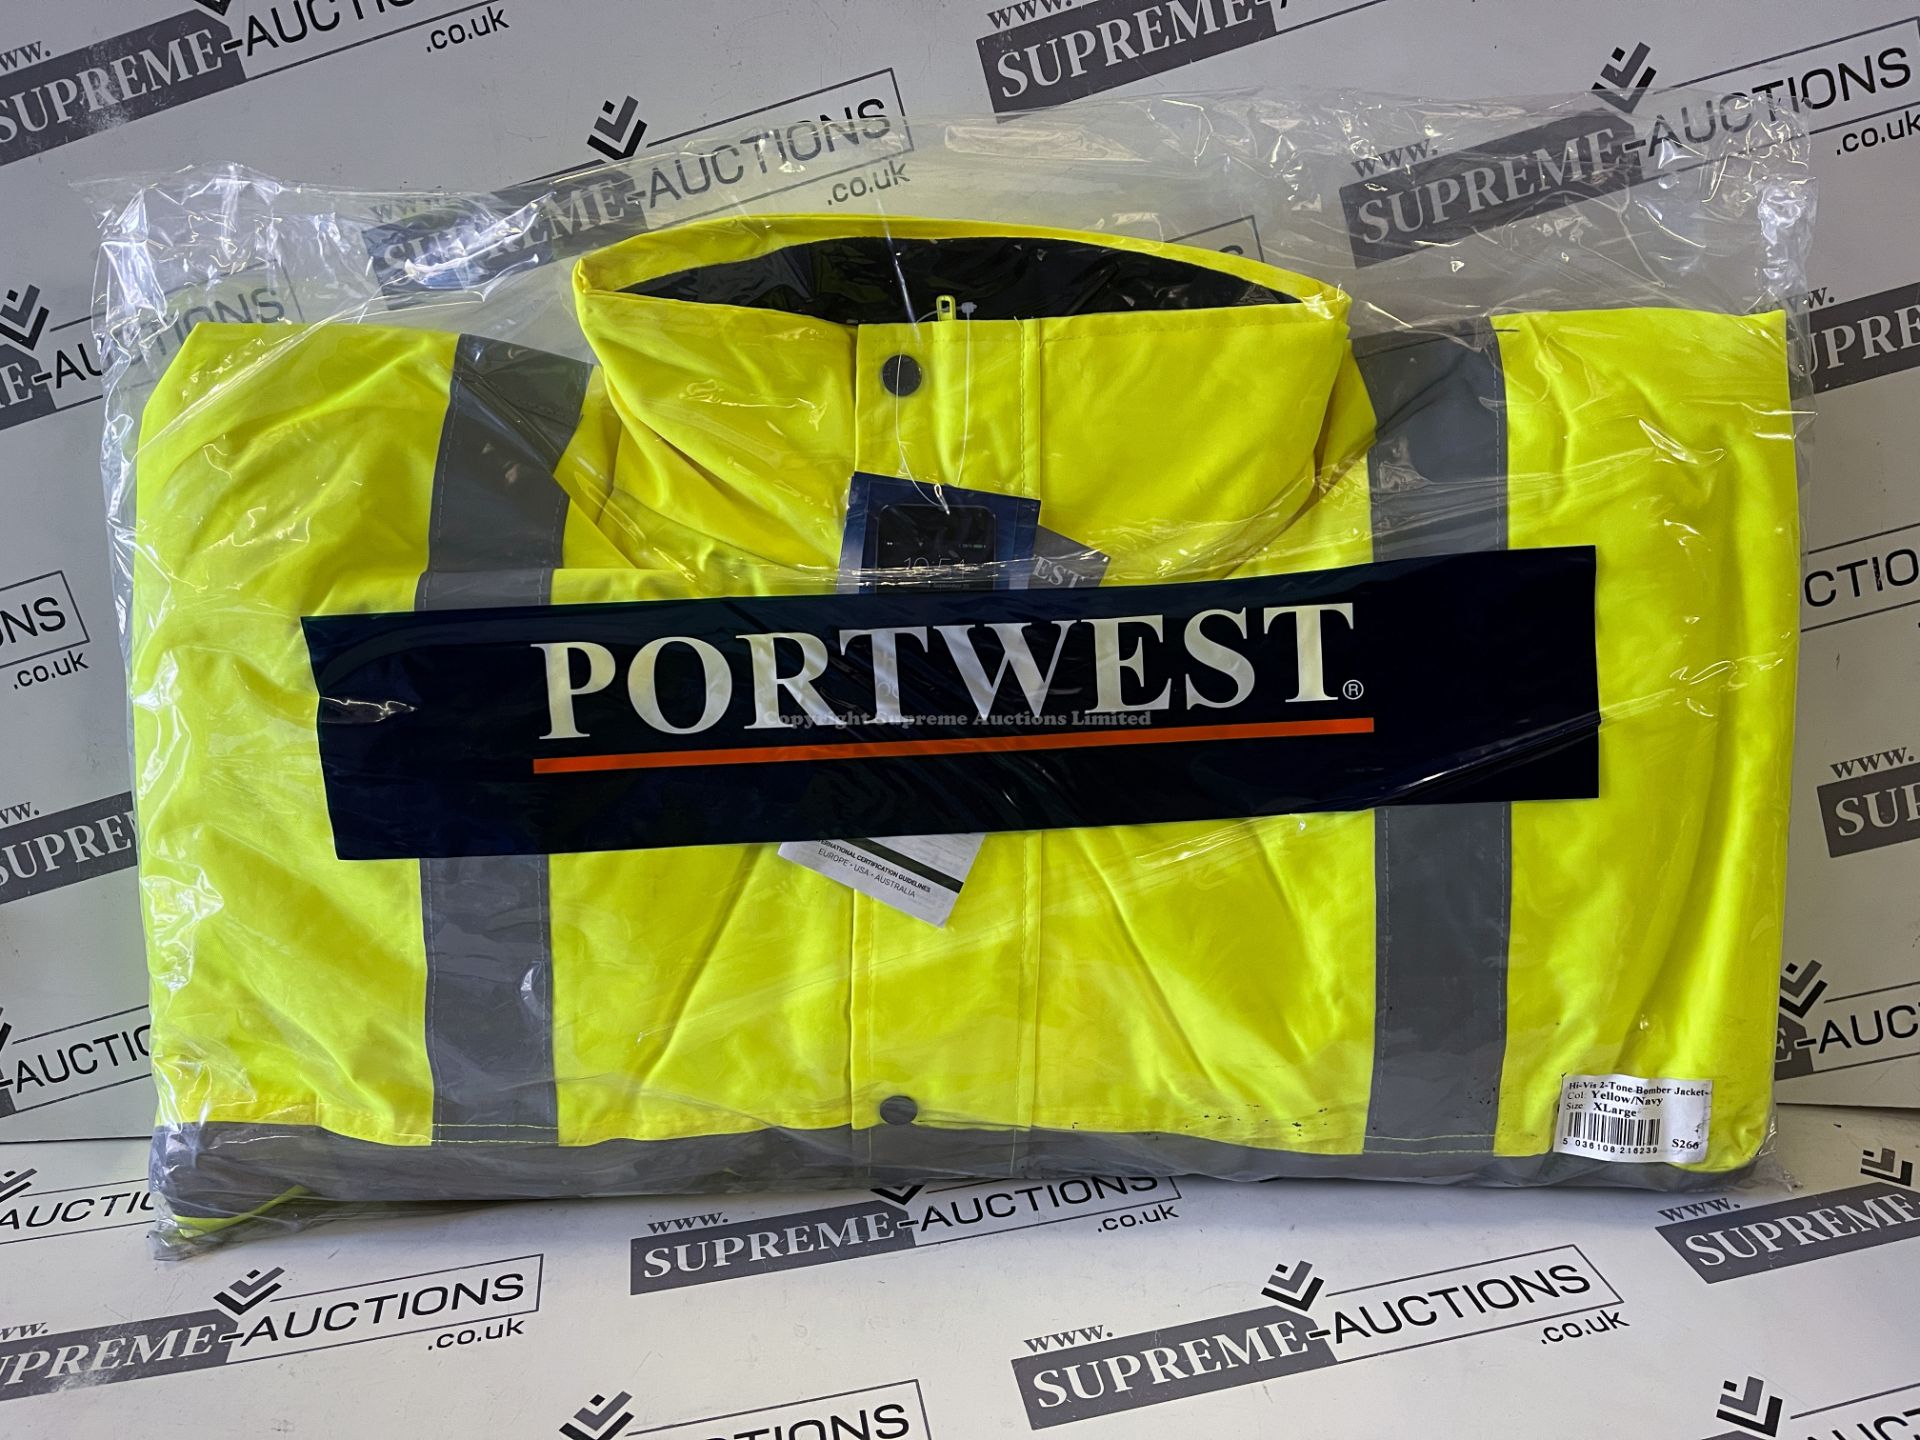 8x BRAND NEW PACKAGED PORTWEST HI-VIS 2 TONE BOMBER JACKETS YELLOW/NAVY - SIZE XL. (S2-LW)